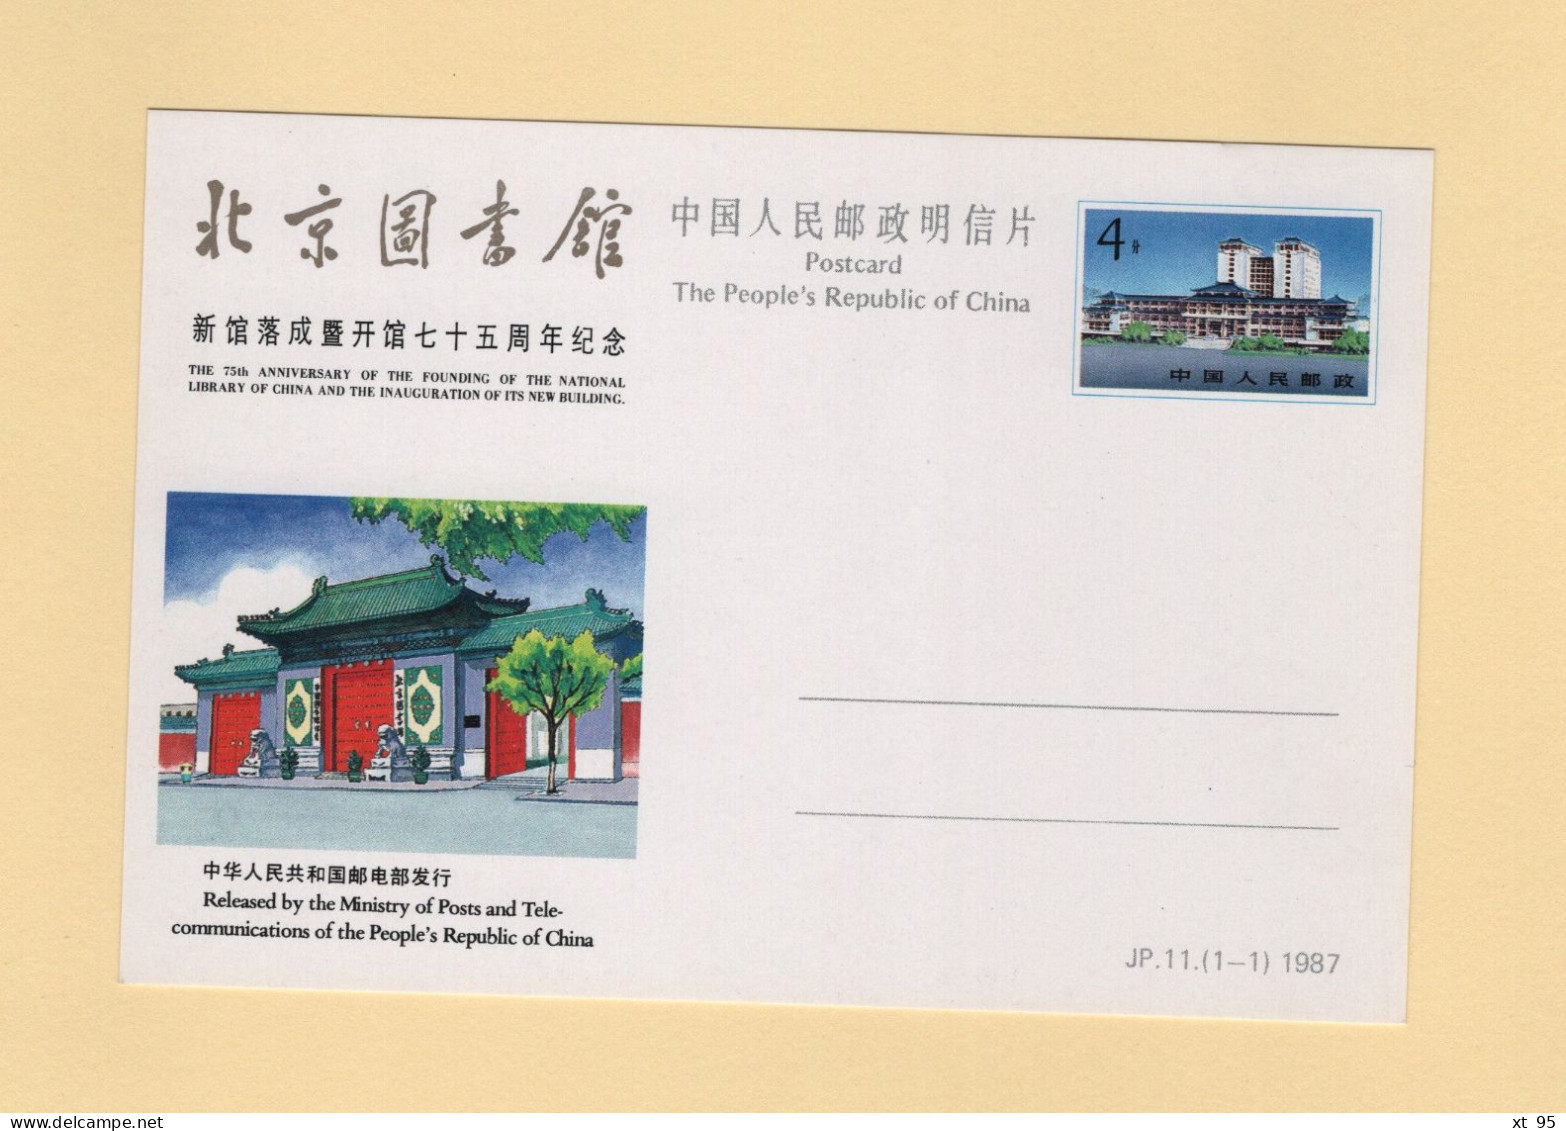 Chine - JP11 - The 75th Anniversary Of The Founding Of The National Library Of China - Postcards